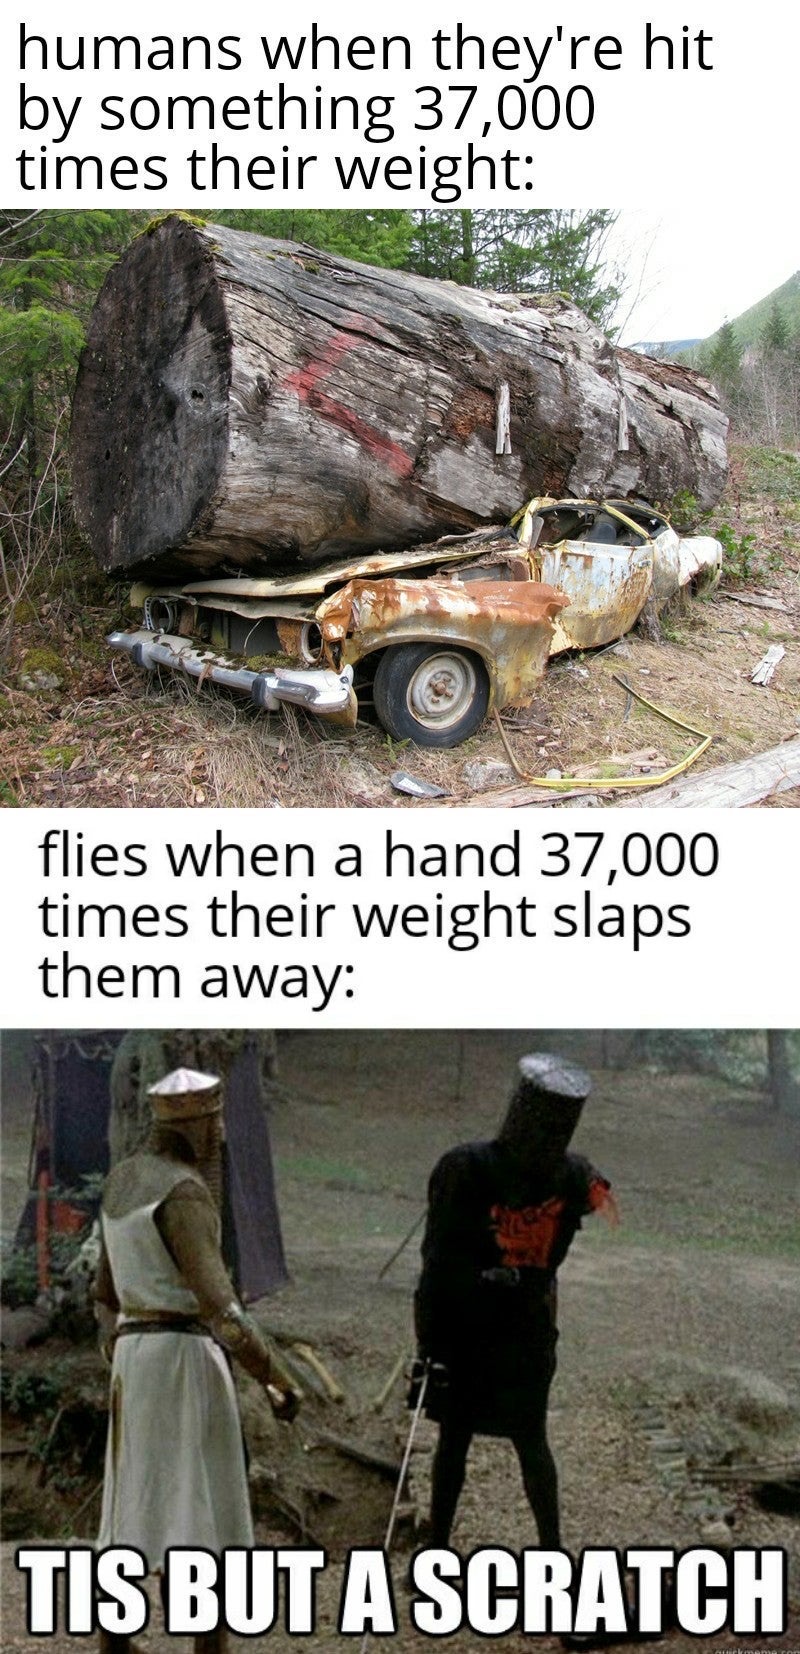 dank memes - just a scratch meme - humans when they're hit by something 37,000 times their weight flies when a hand 37,000 times their weight slaps them away Tis But A Scratch